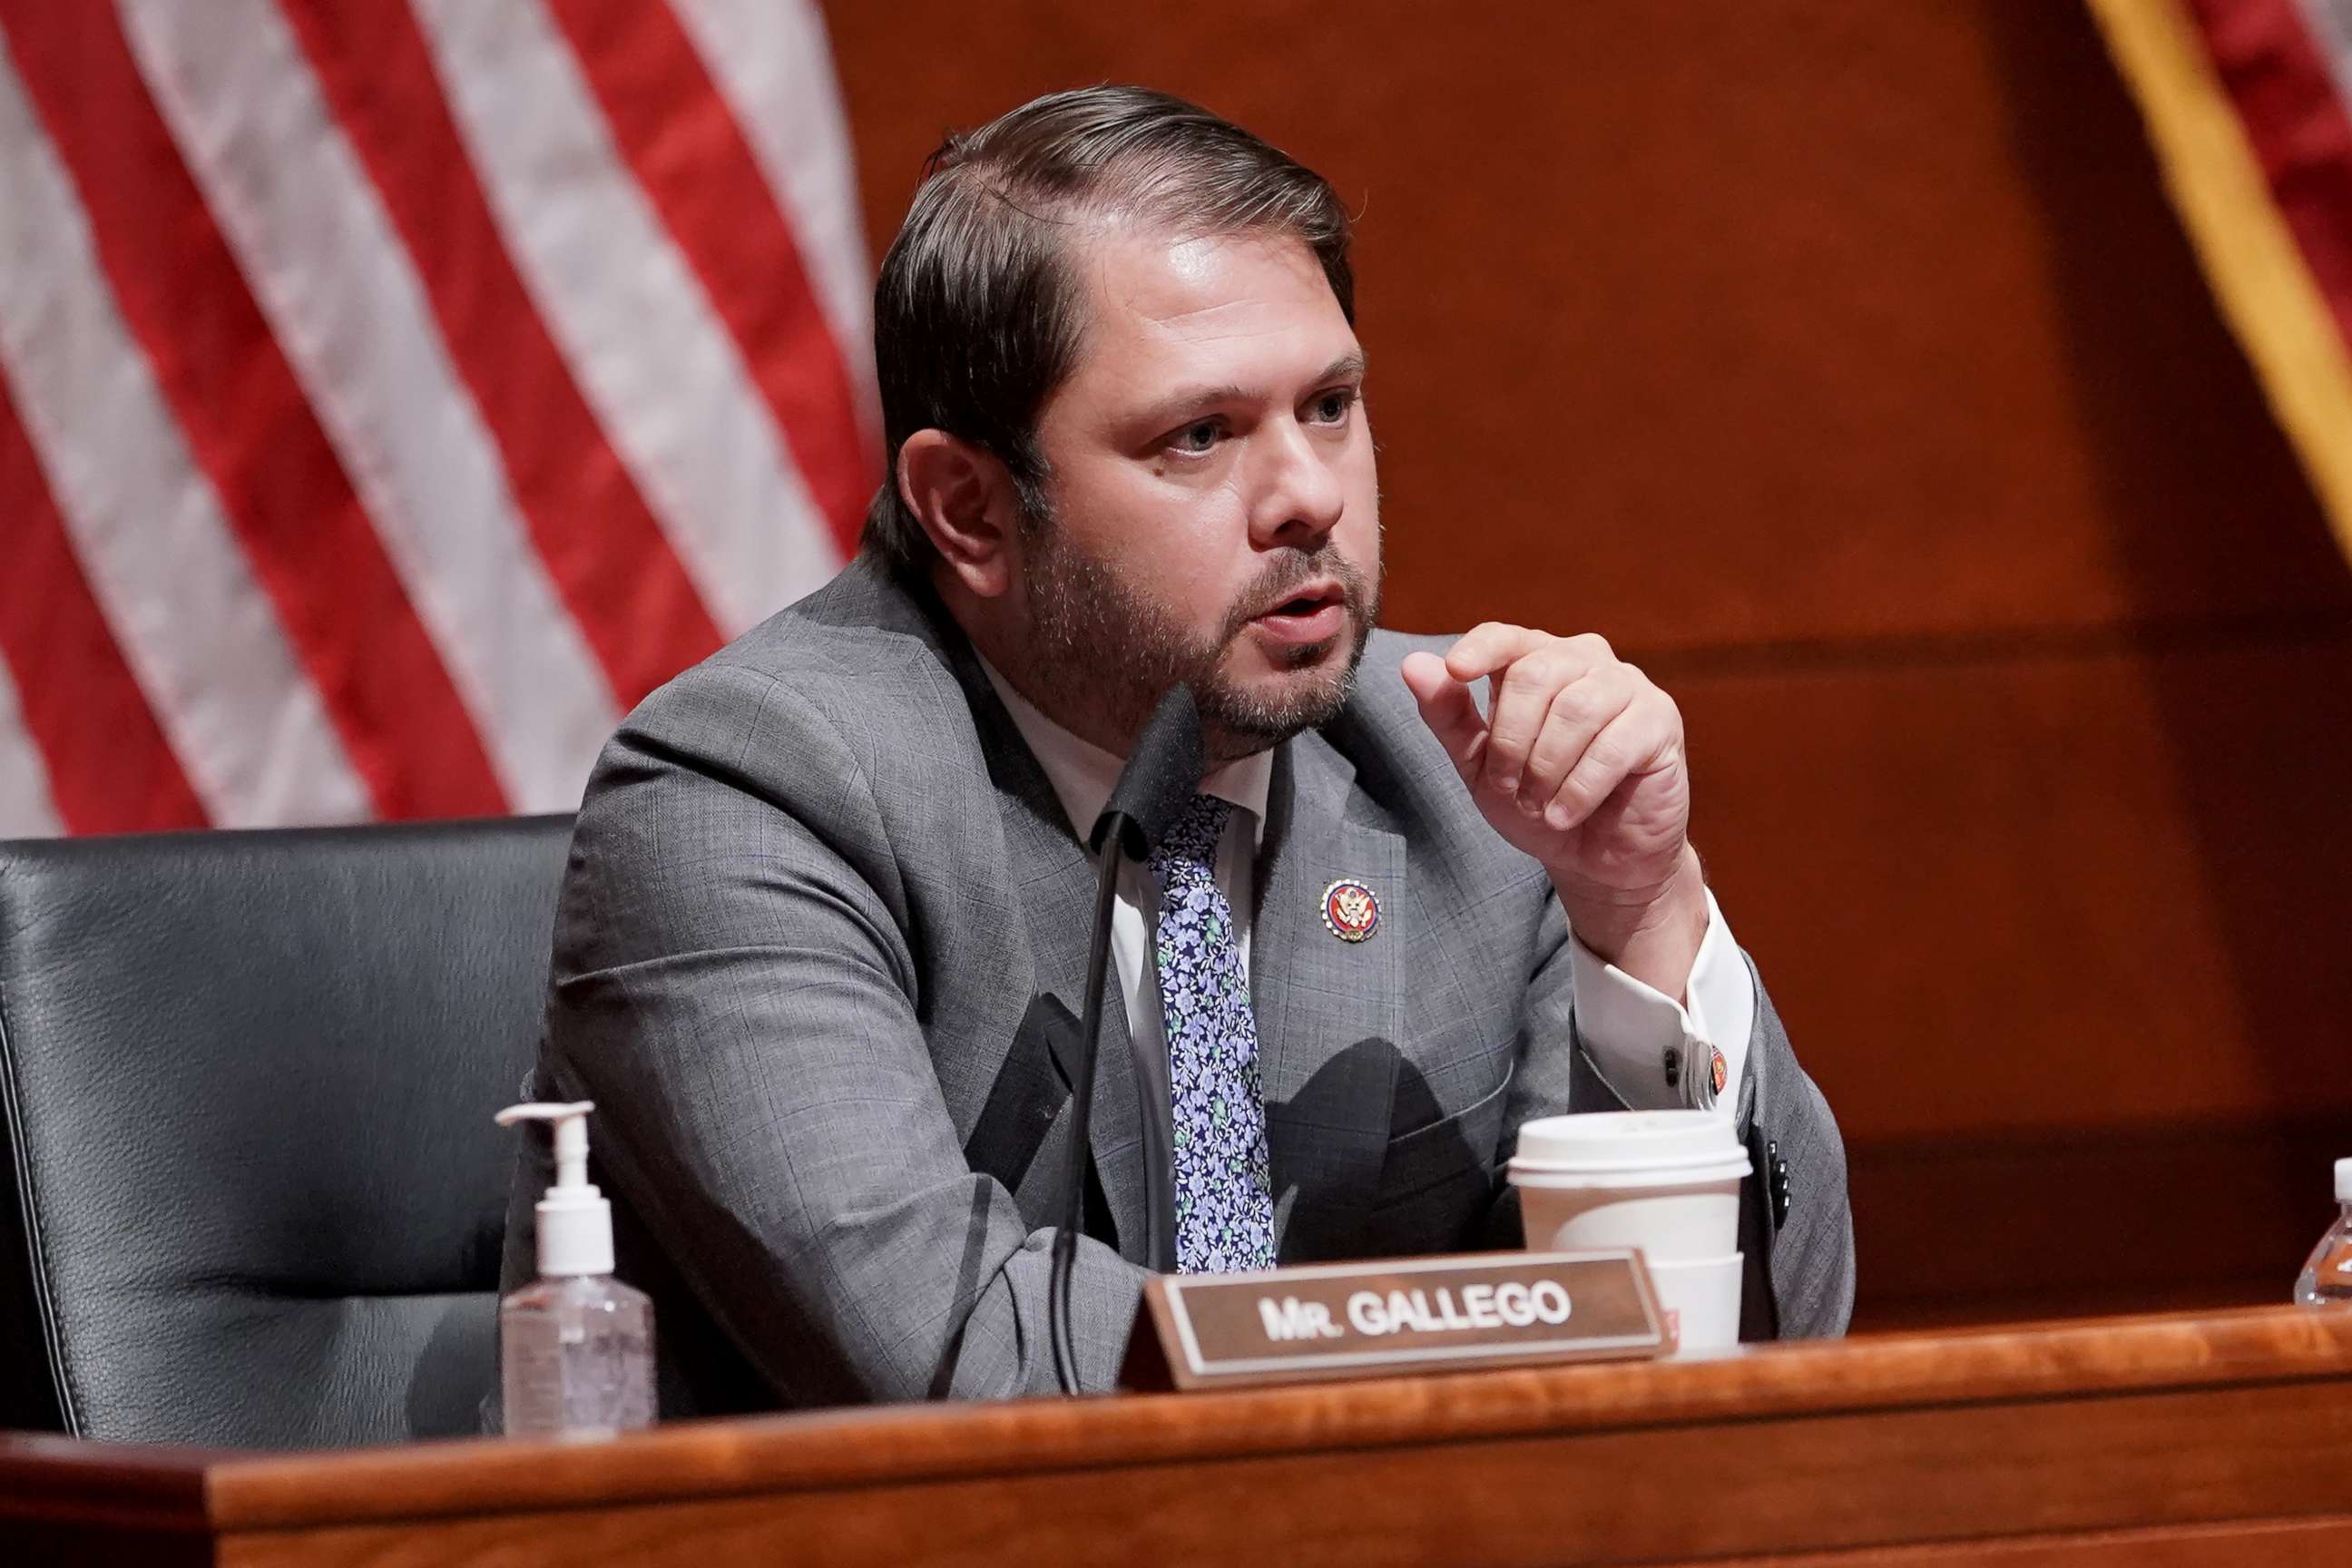 PHOTO: Representative Ruben Gallego speaks during a House Armed Services Committee hearing in Washington, D.C., July 9, 2020.